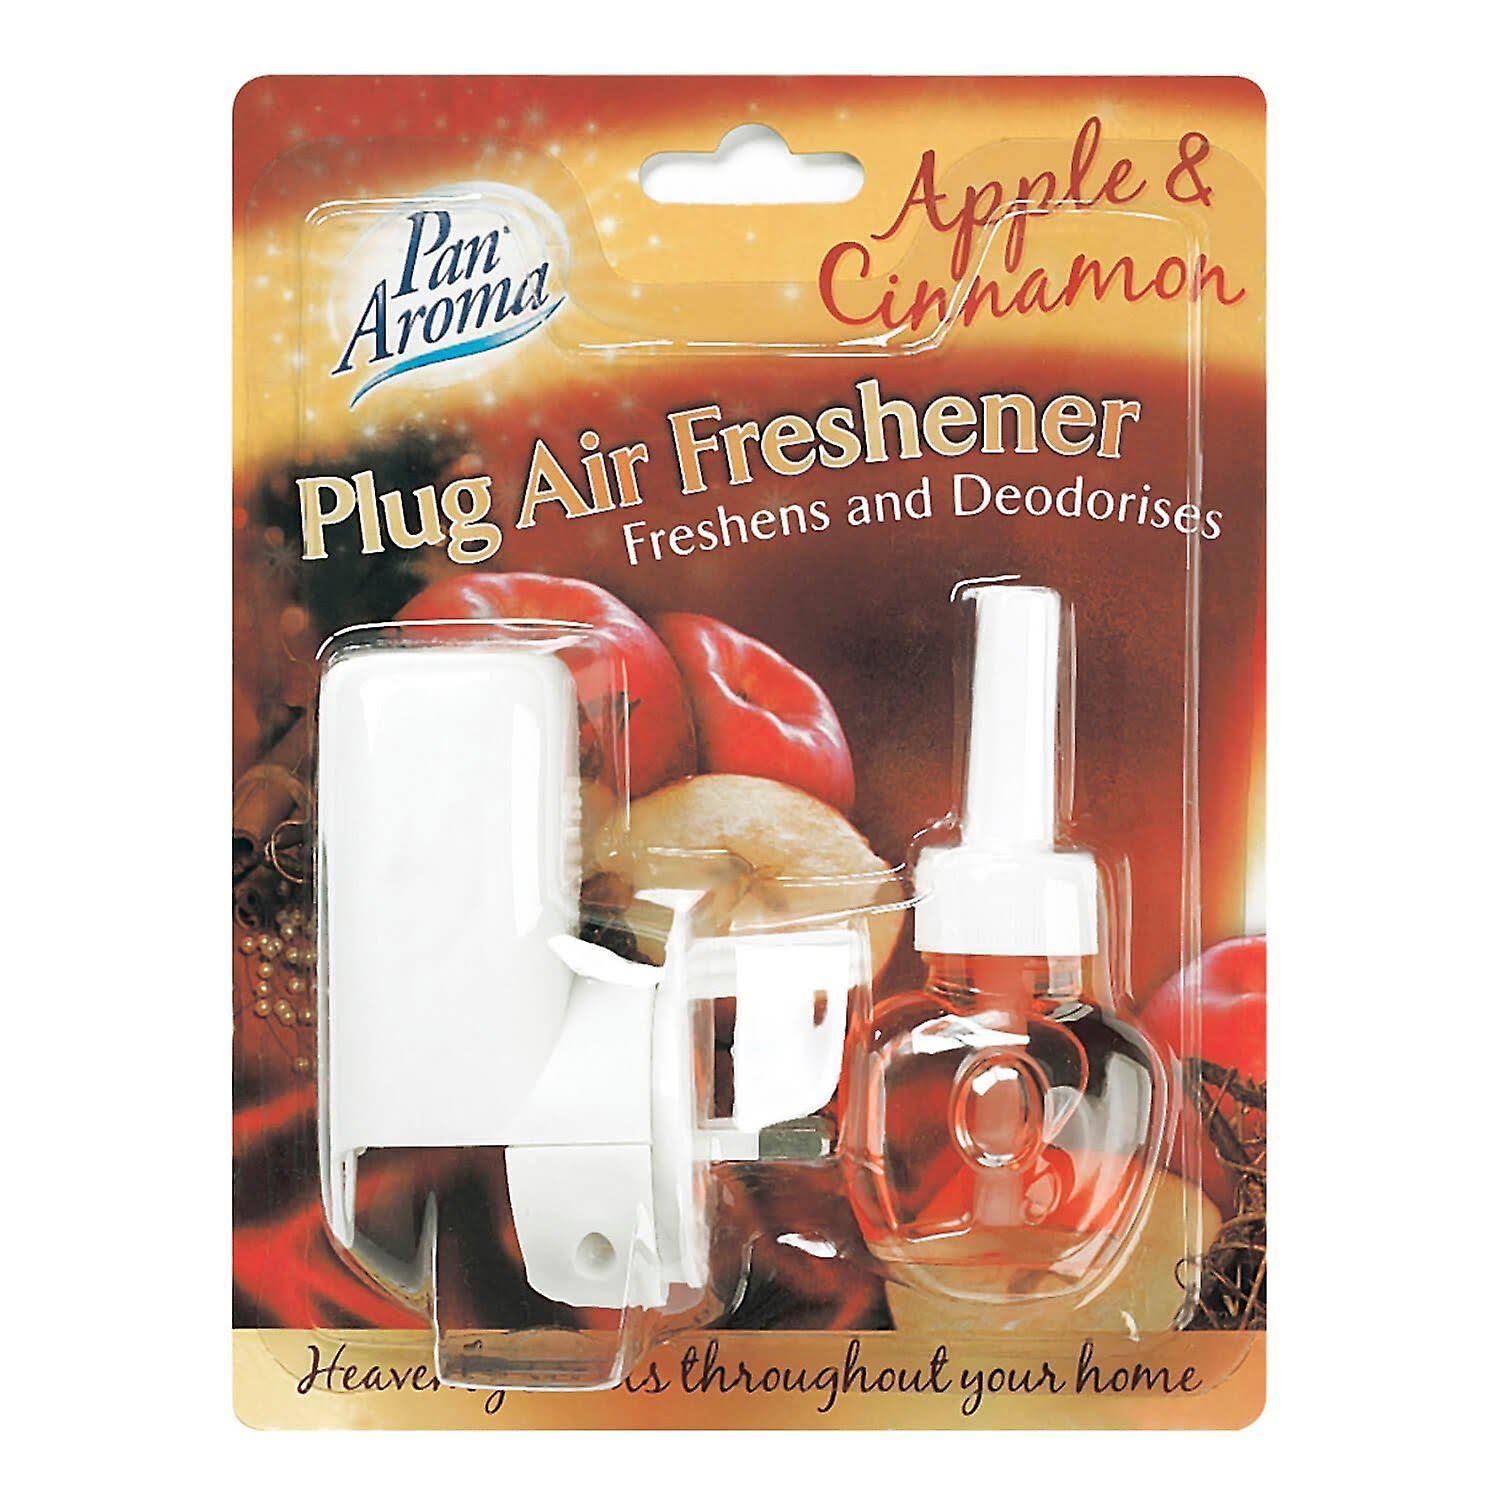 Pan Aroma Plug in Air Fresheners with Liquid Refill - Apple and Cinnamon